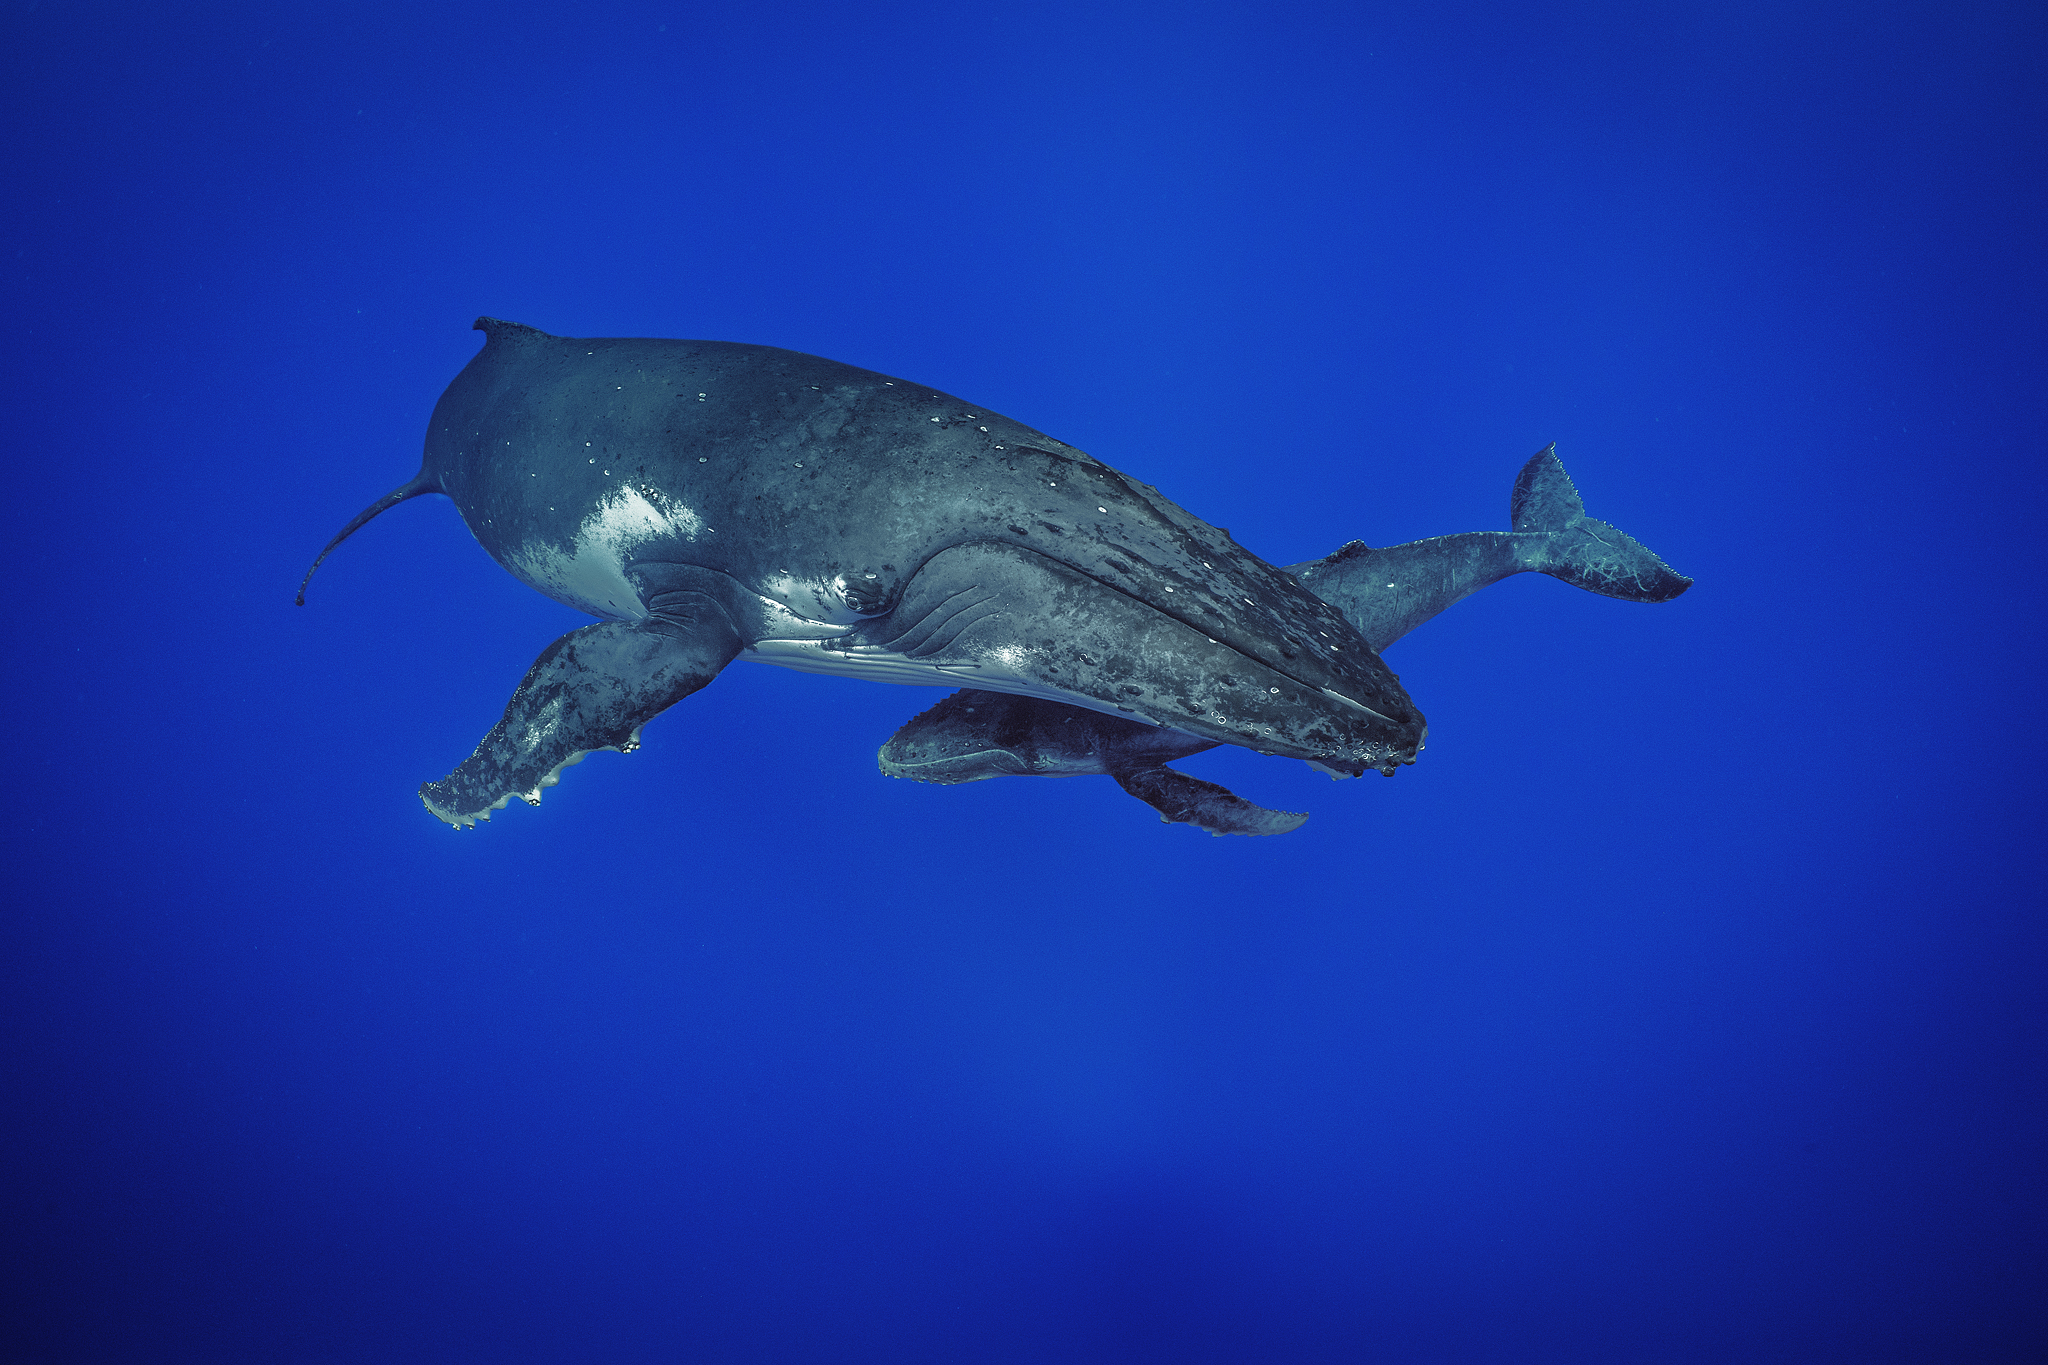 A mother Humpback Whale with her calf in the waters off of Rarotonga, Cook Islands. Humpbacks in this region spend summers feeding in Antarctica, then migrate to the South Pacific to places like the Cook Islands where they have their calves and spend time in the warm, protected waters here. Calves spend approximately one year with their moms, during which time they learn many of the things they will need to survive. (Brian Skerry)